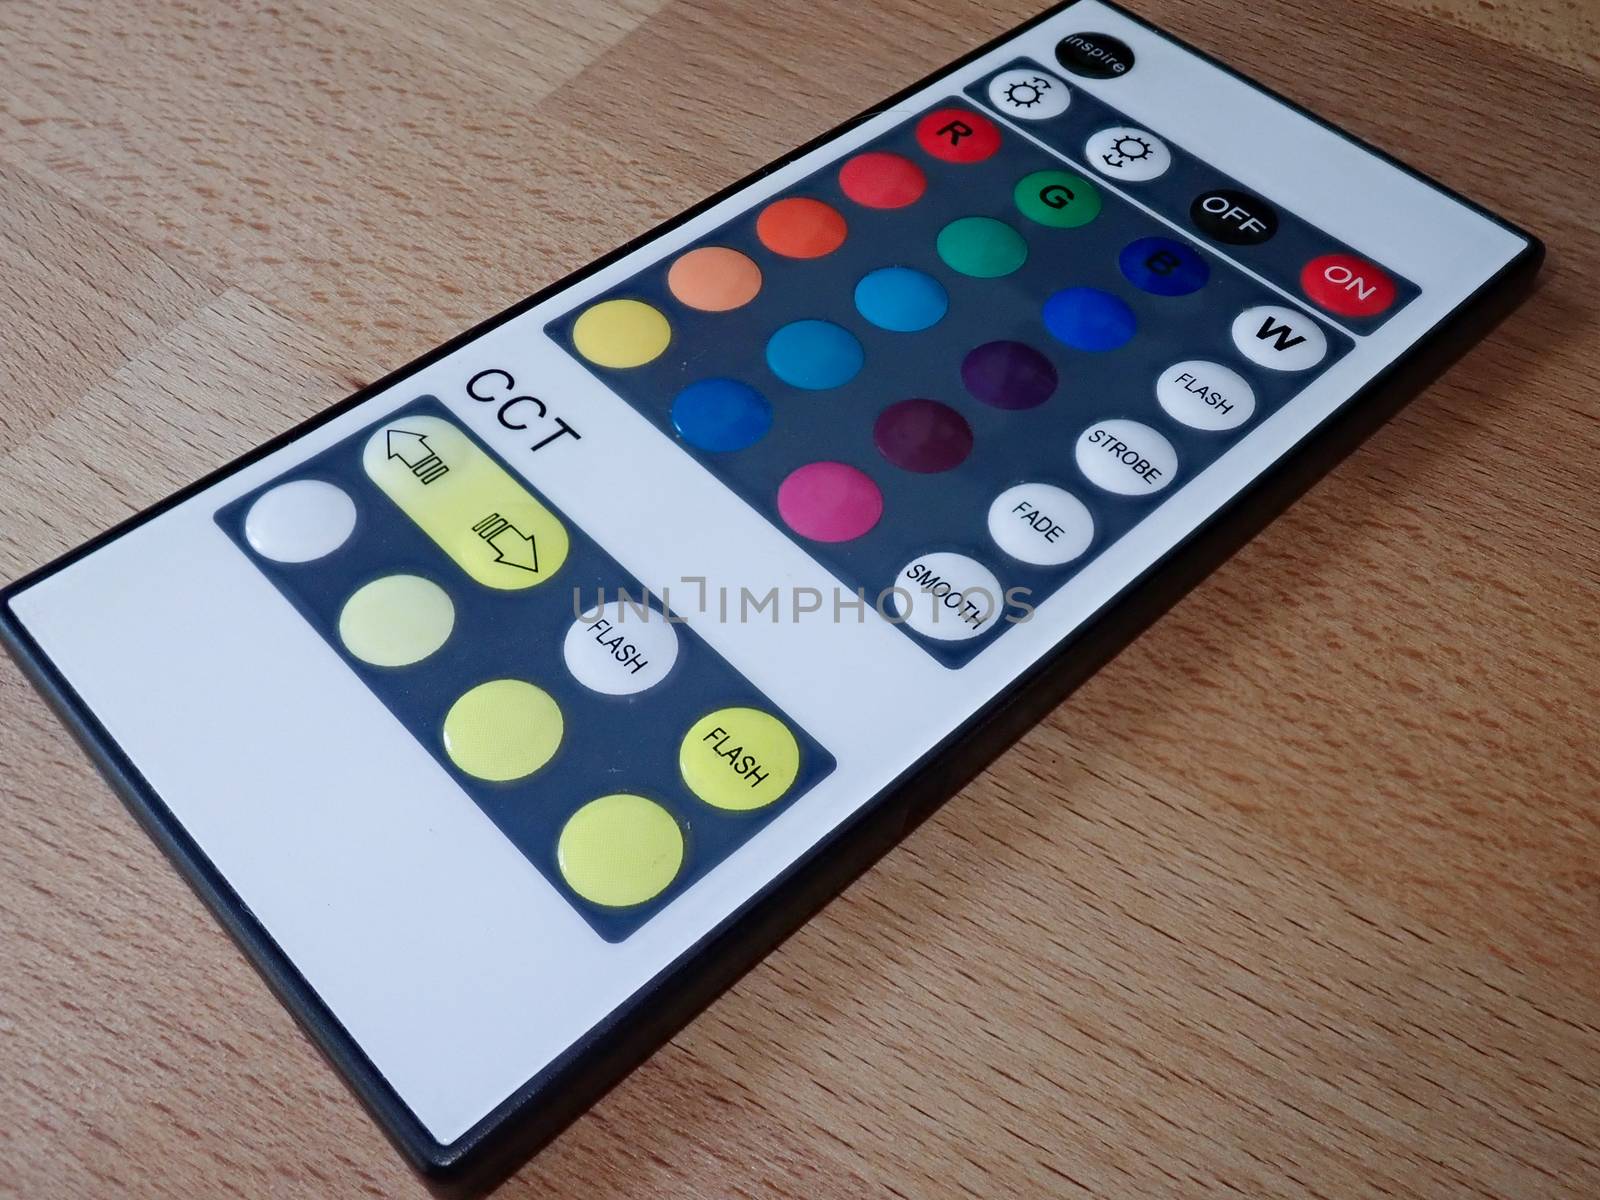 Bucharest / Romania - July 23, 2019: Rgb led remote controller pointing to the led strip by Luca-Mih